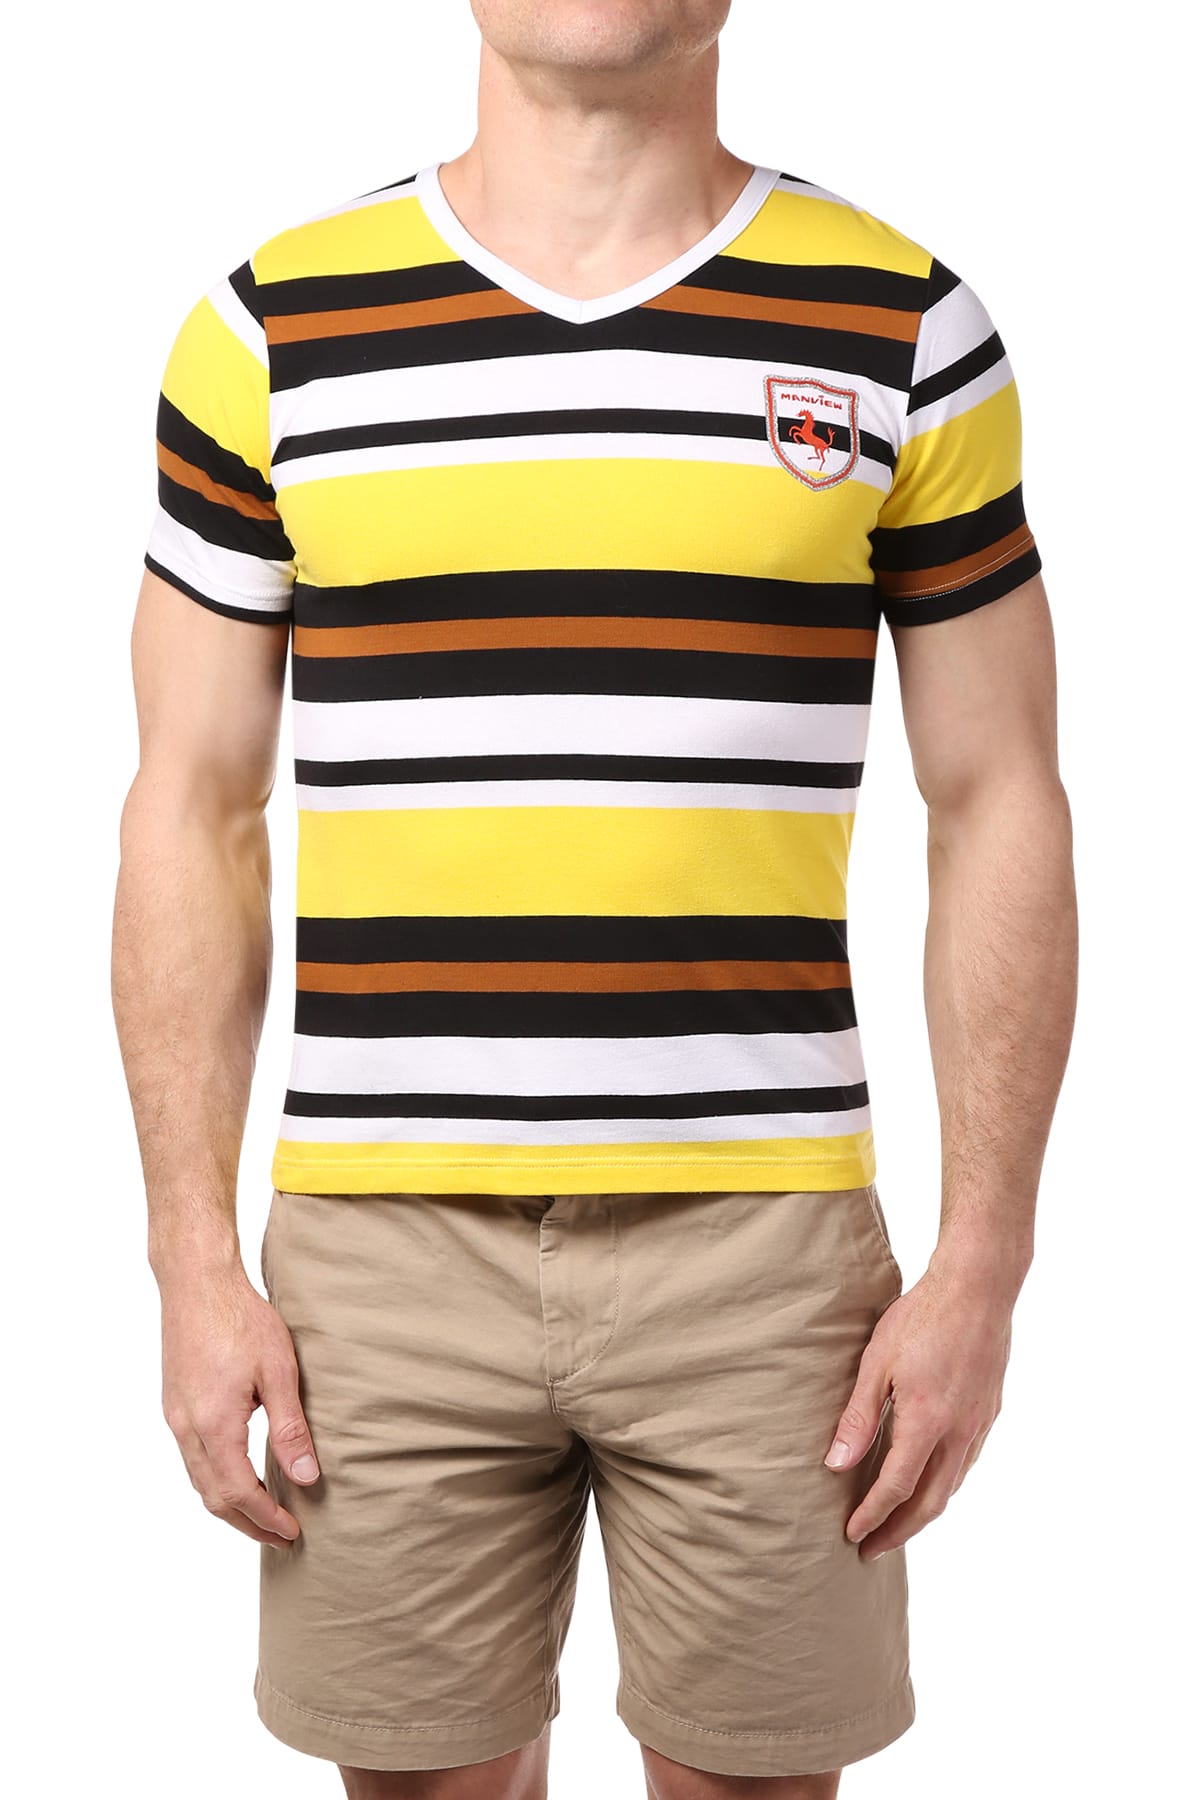 Manview Yellow Striped V-Neck Tee